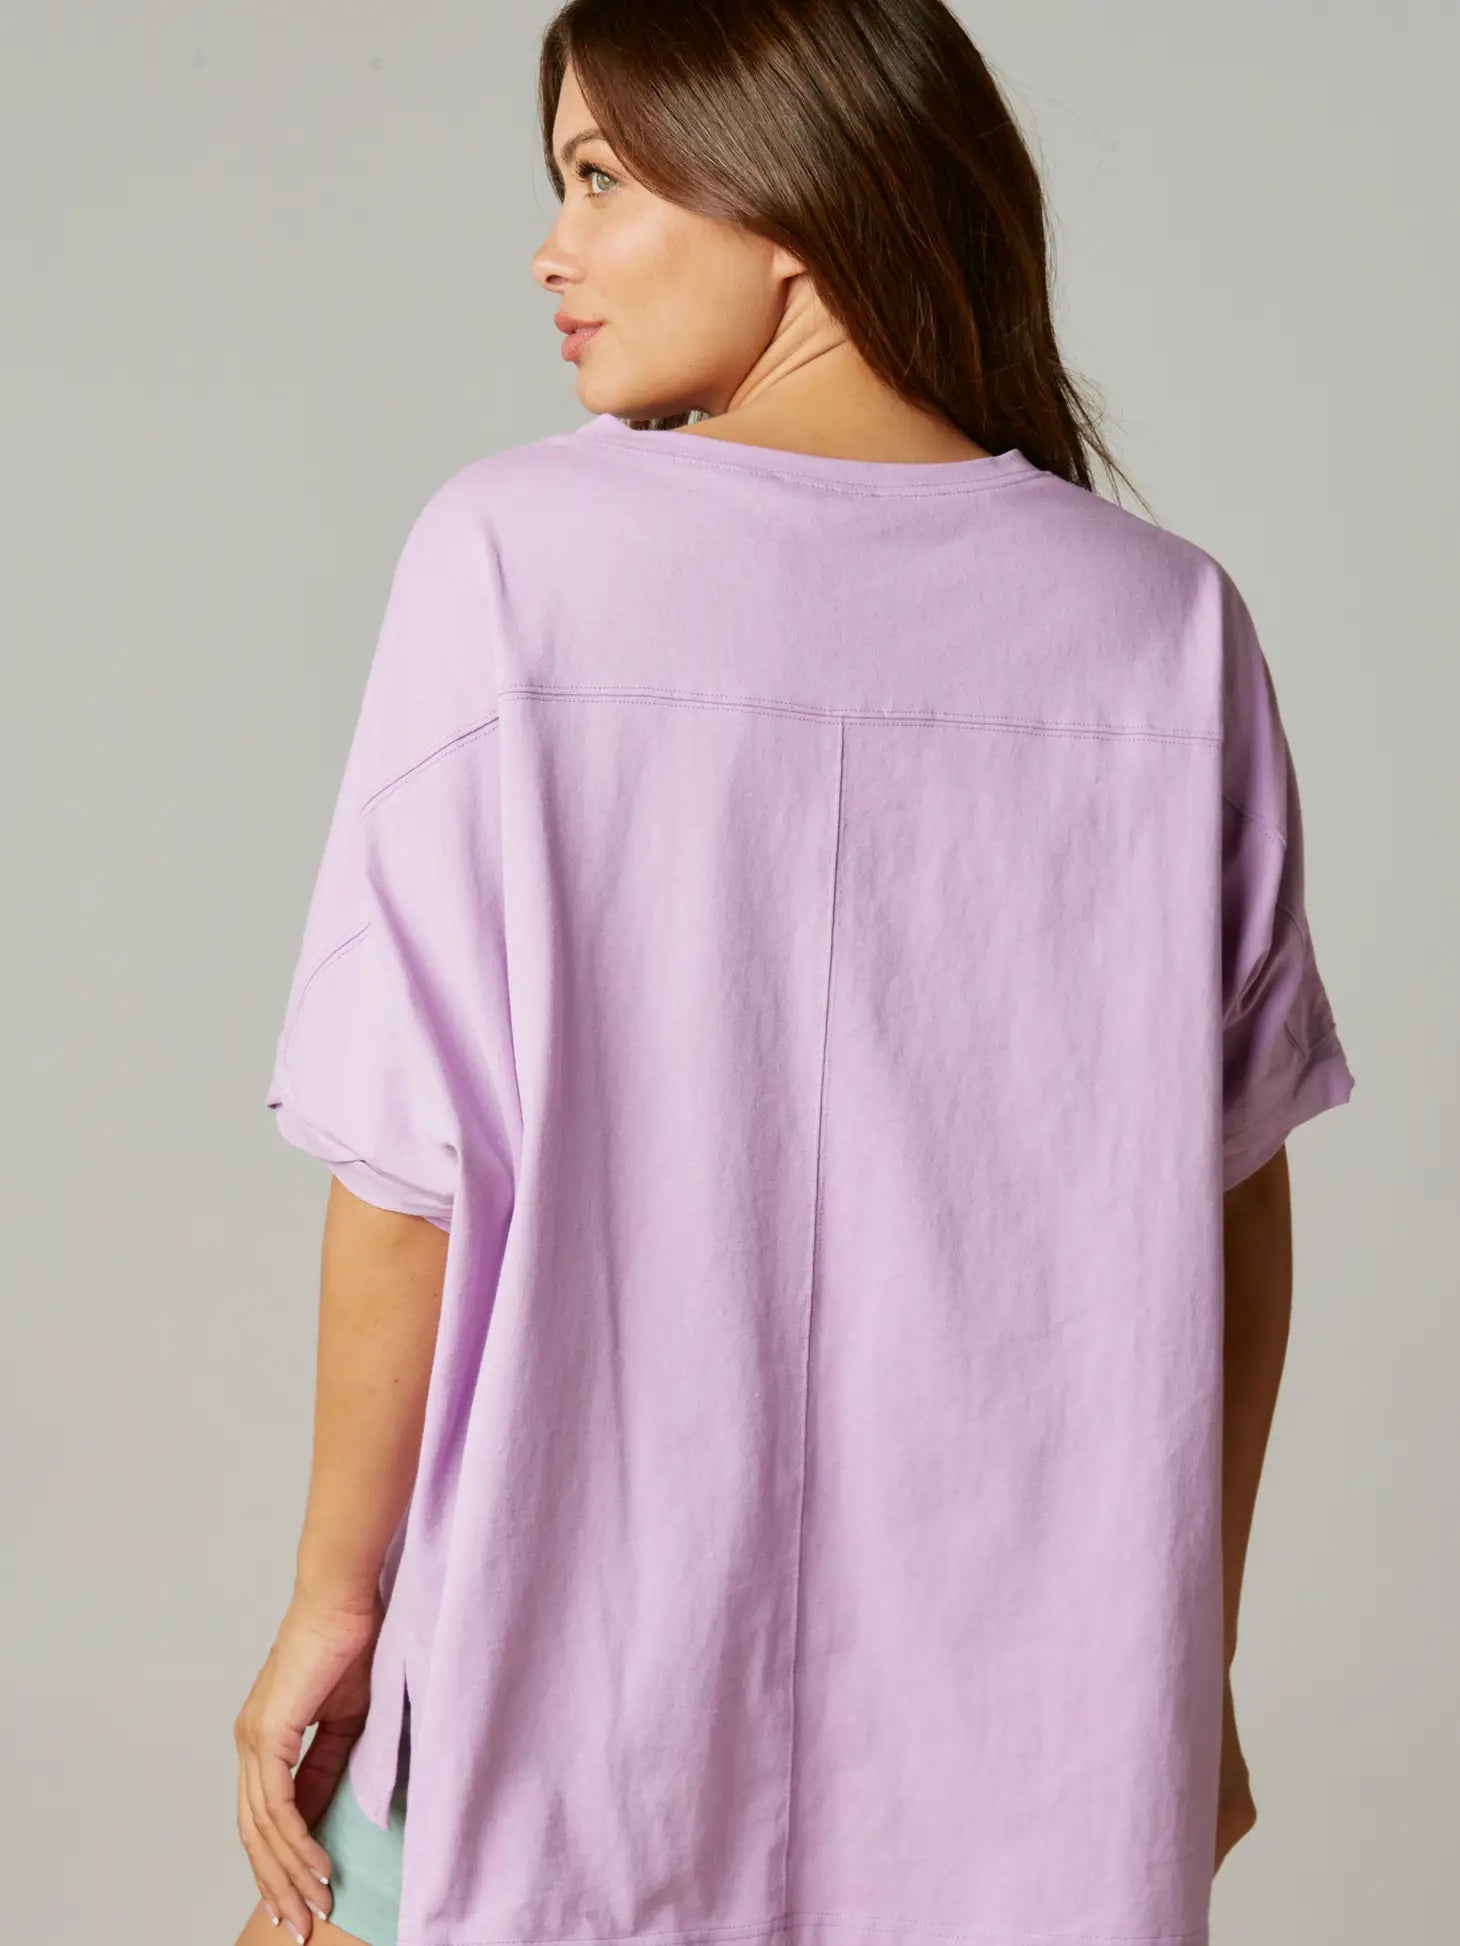 Sequin Cheers Shirt - Lavender